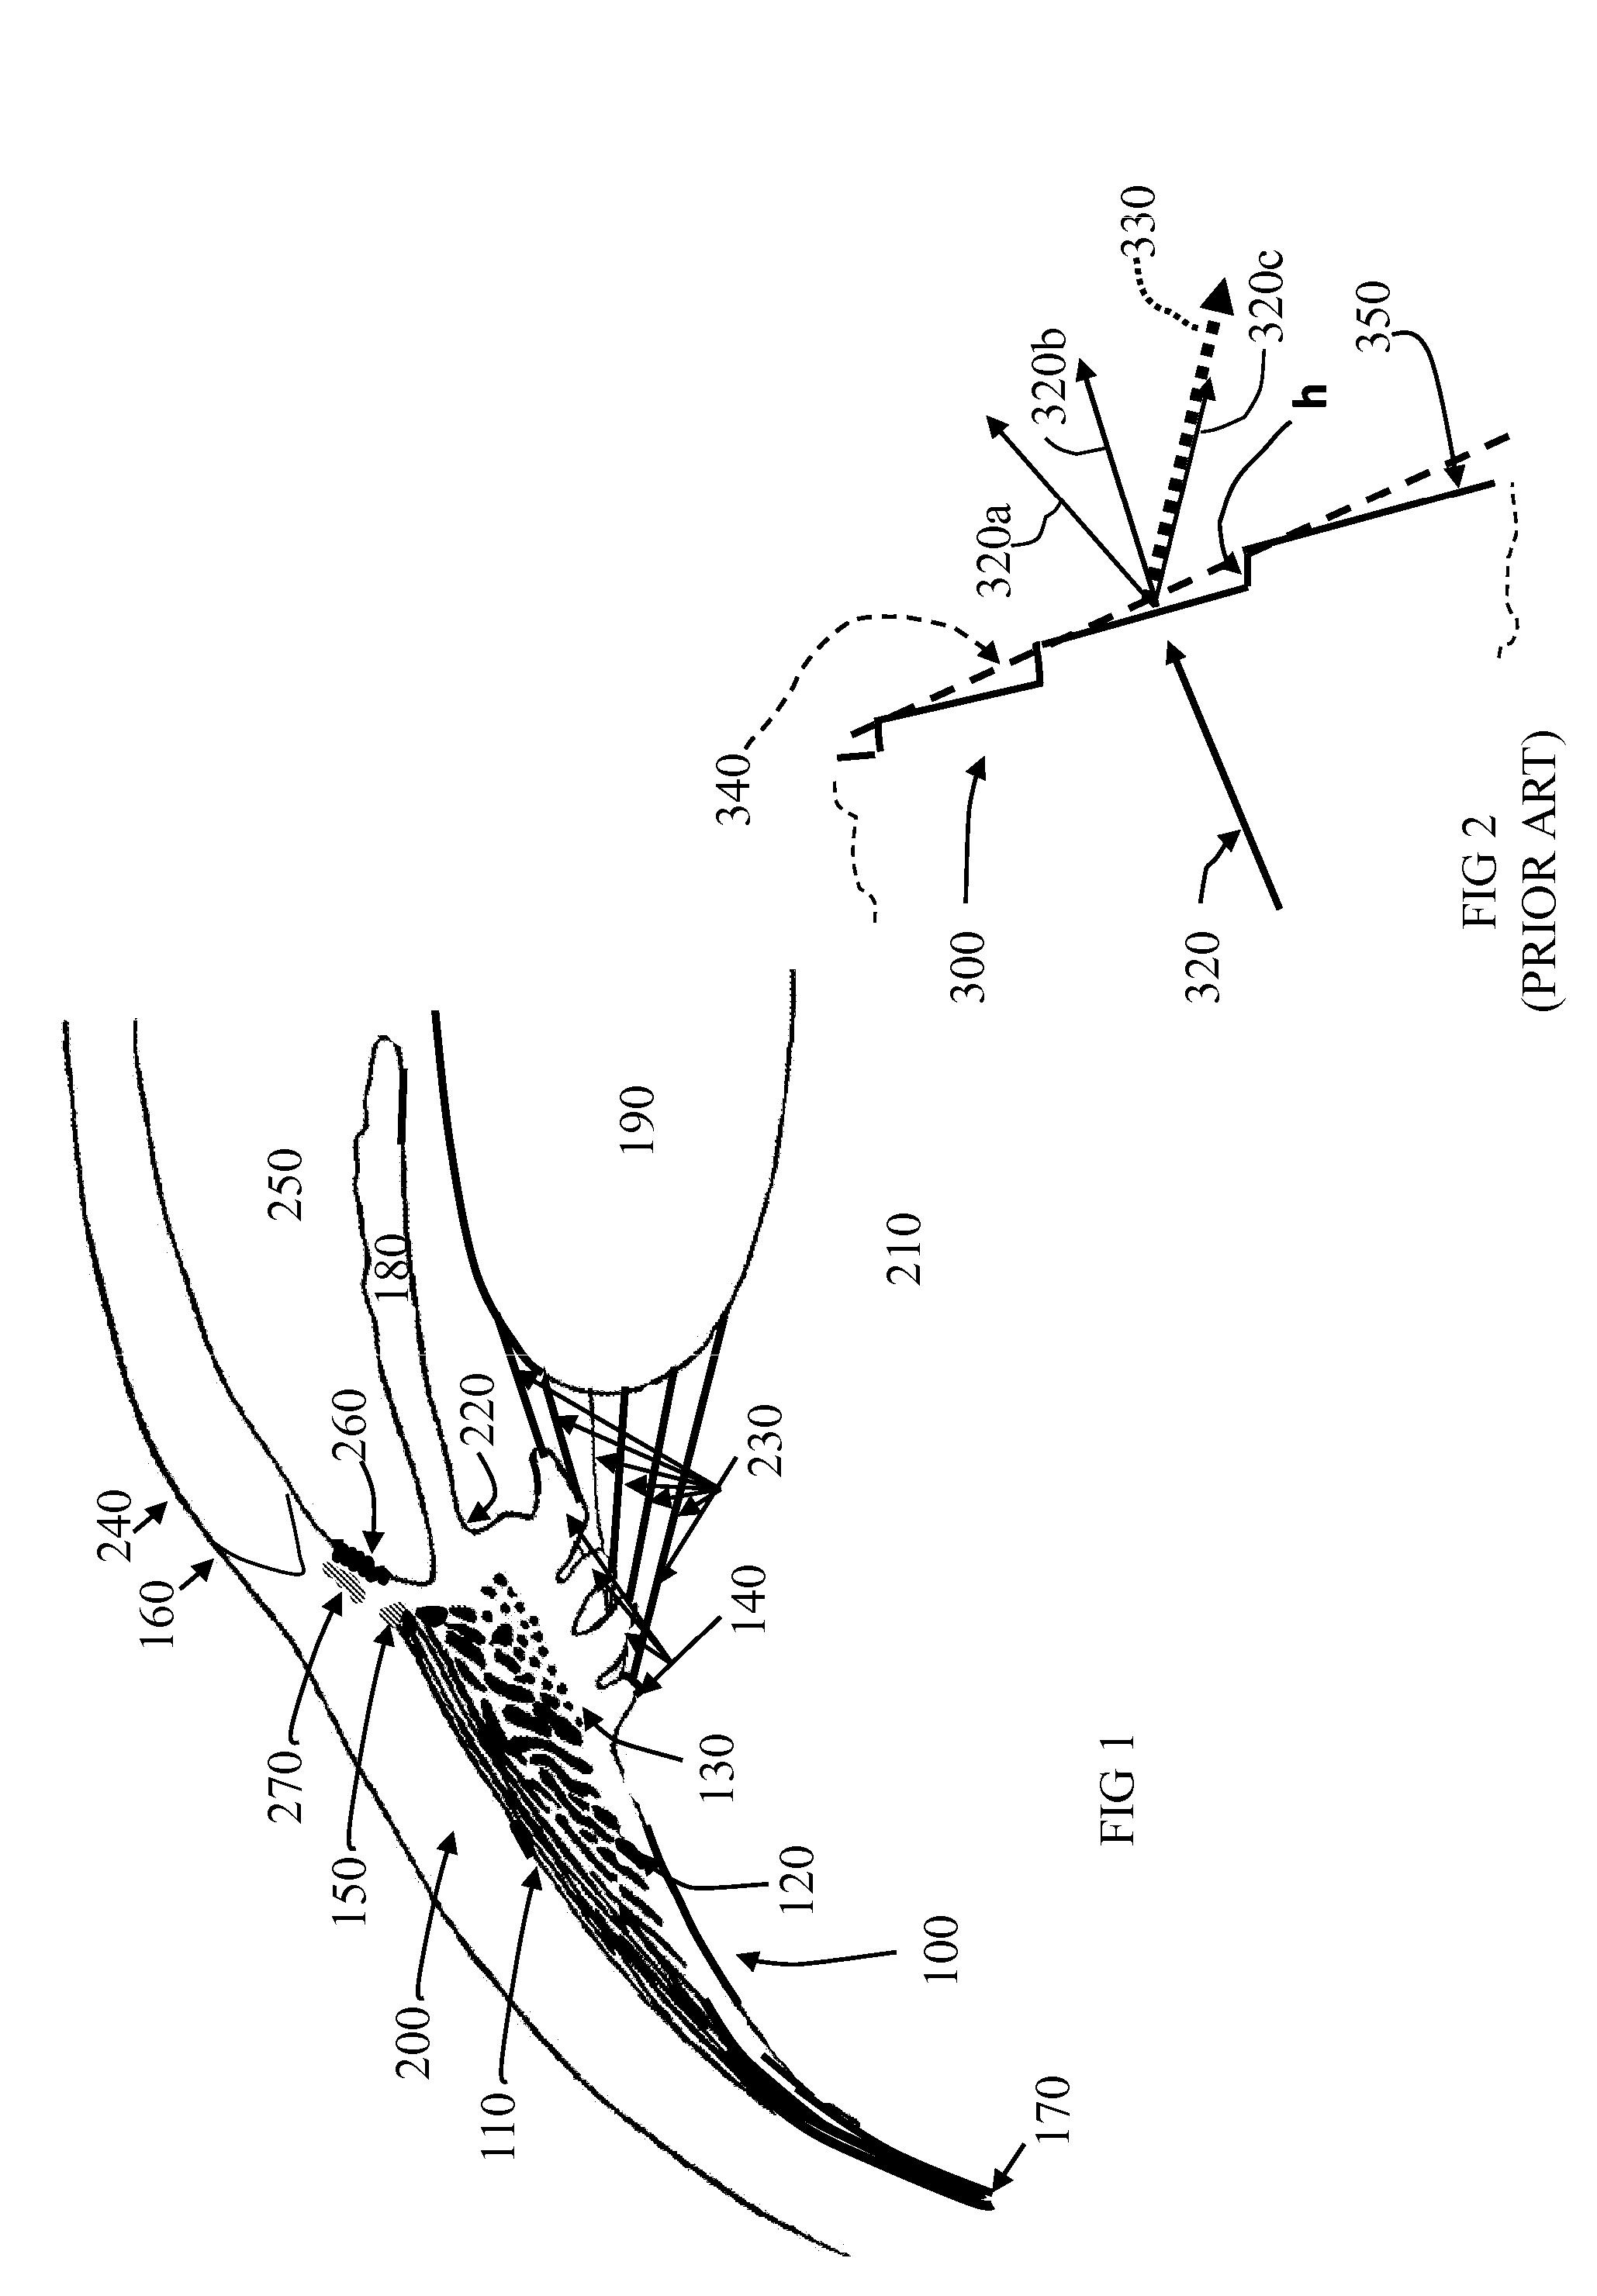 Switchable diffractive accommodating lens